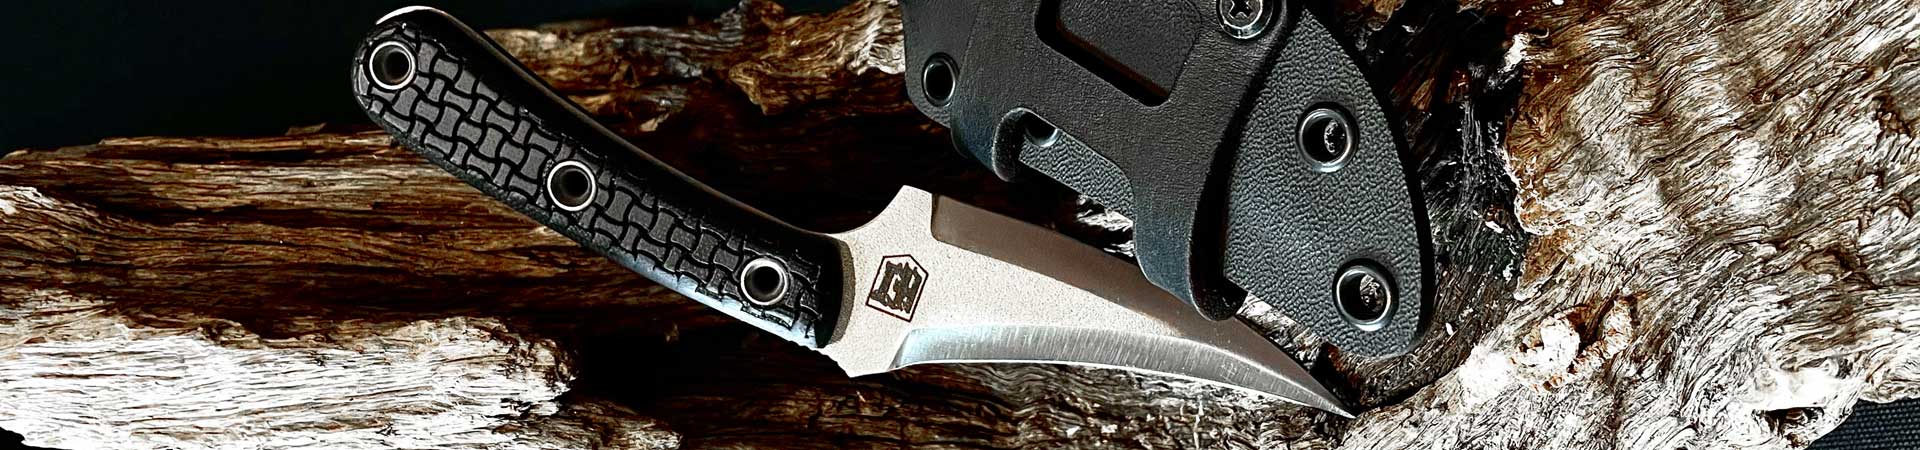 Knives by Fullout Tactical.